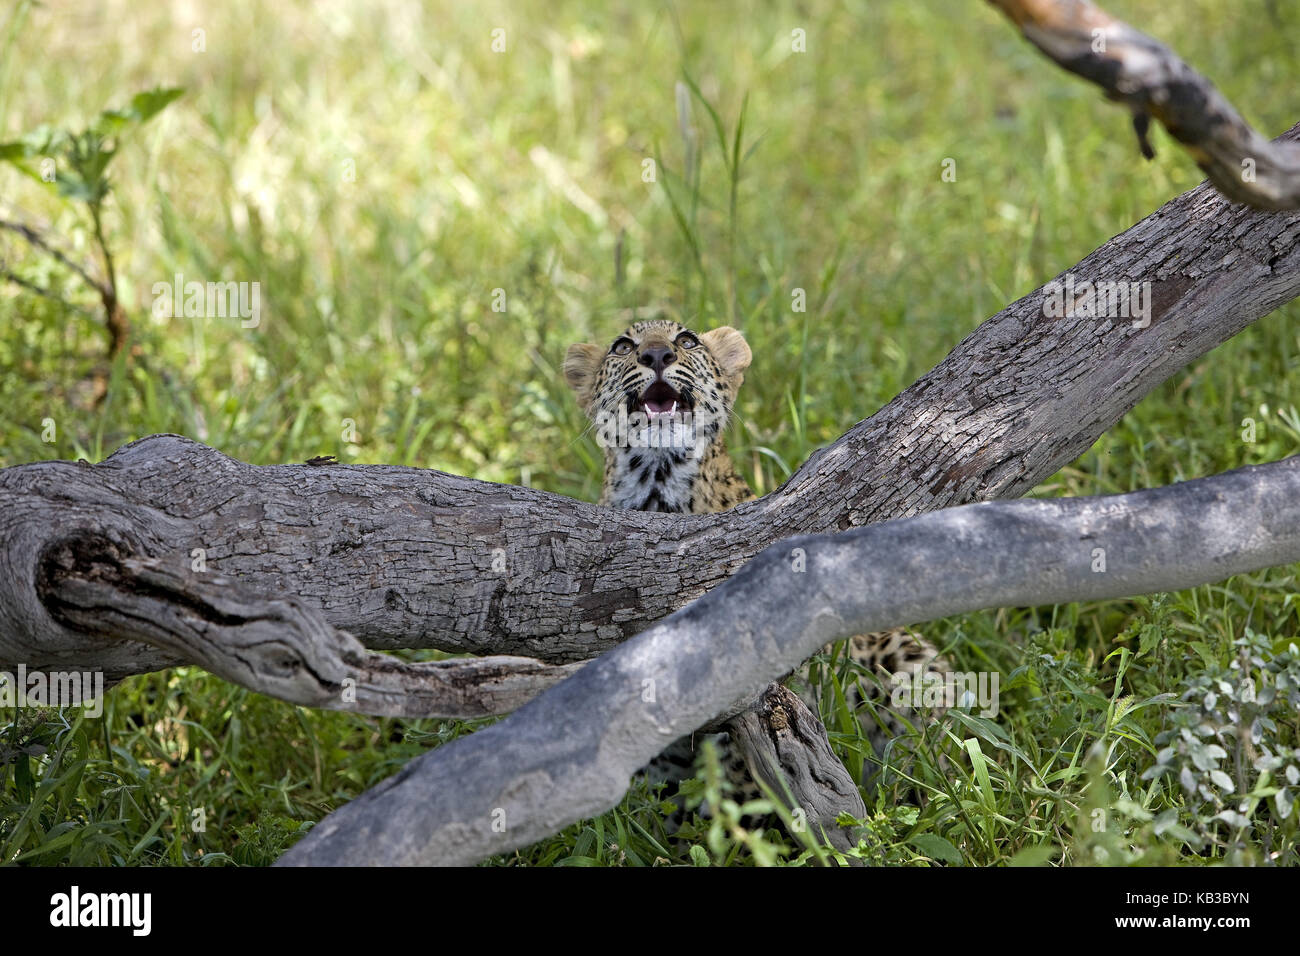 Leopard, Panthera pardus, young animal, 4 month-old, view upwards, Namibia, Stock Photo